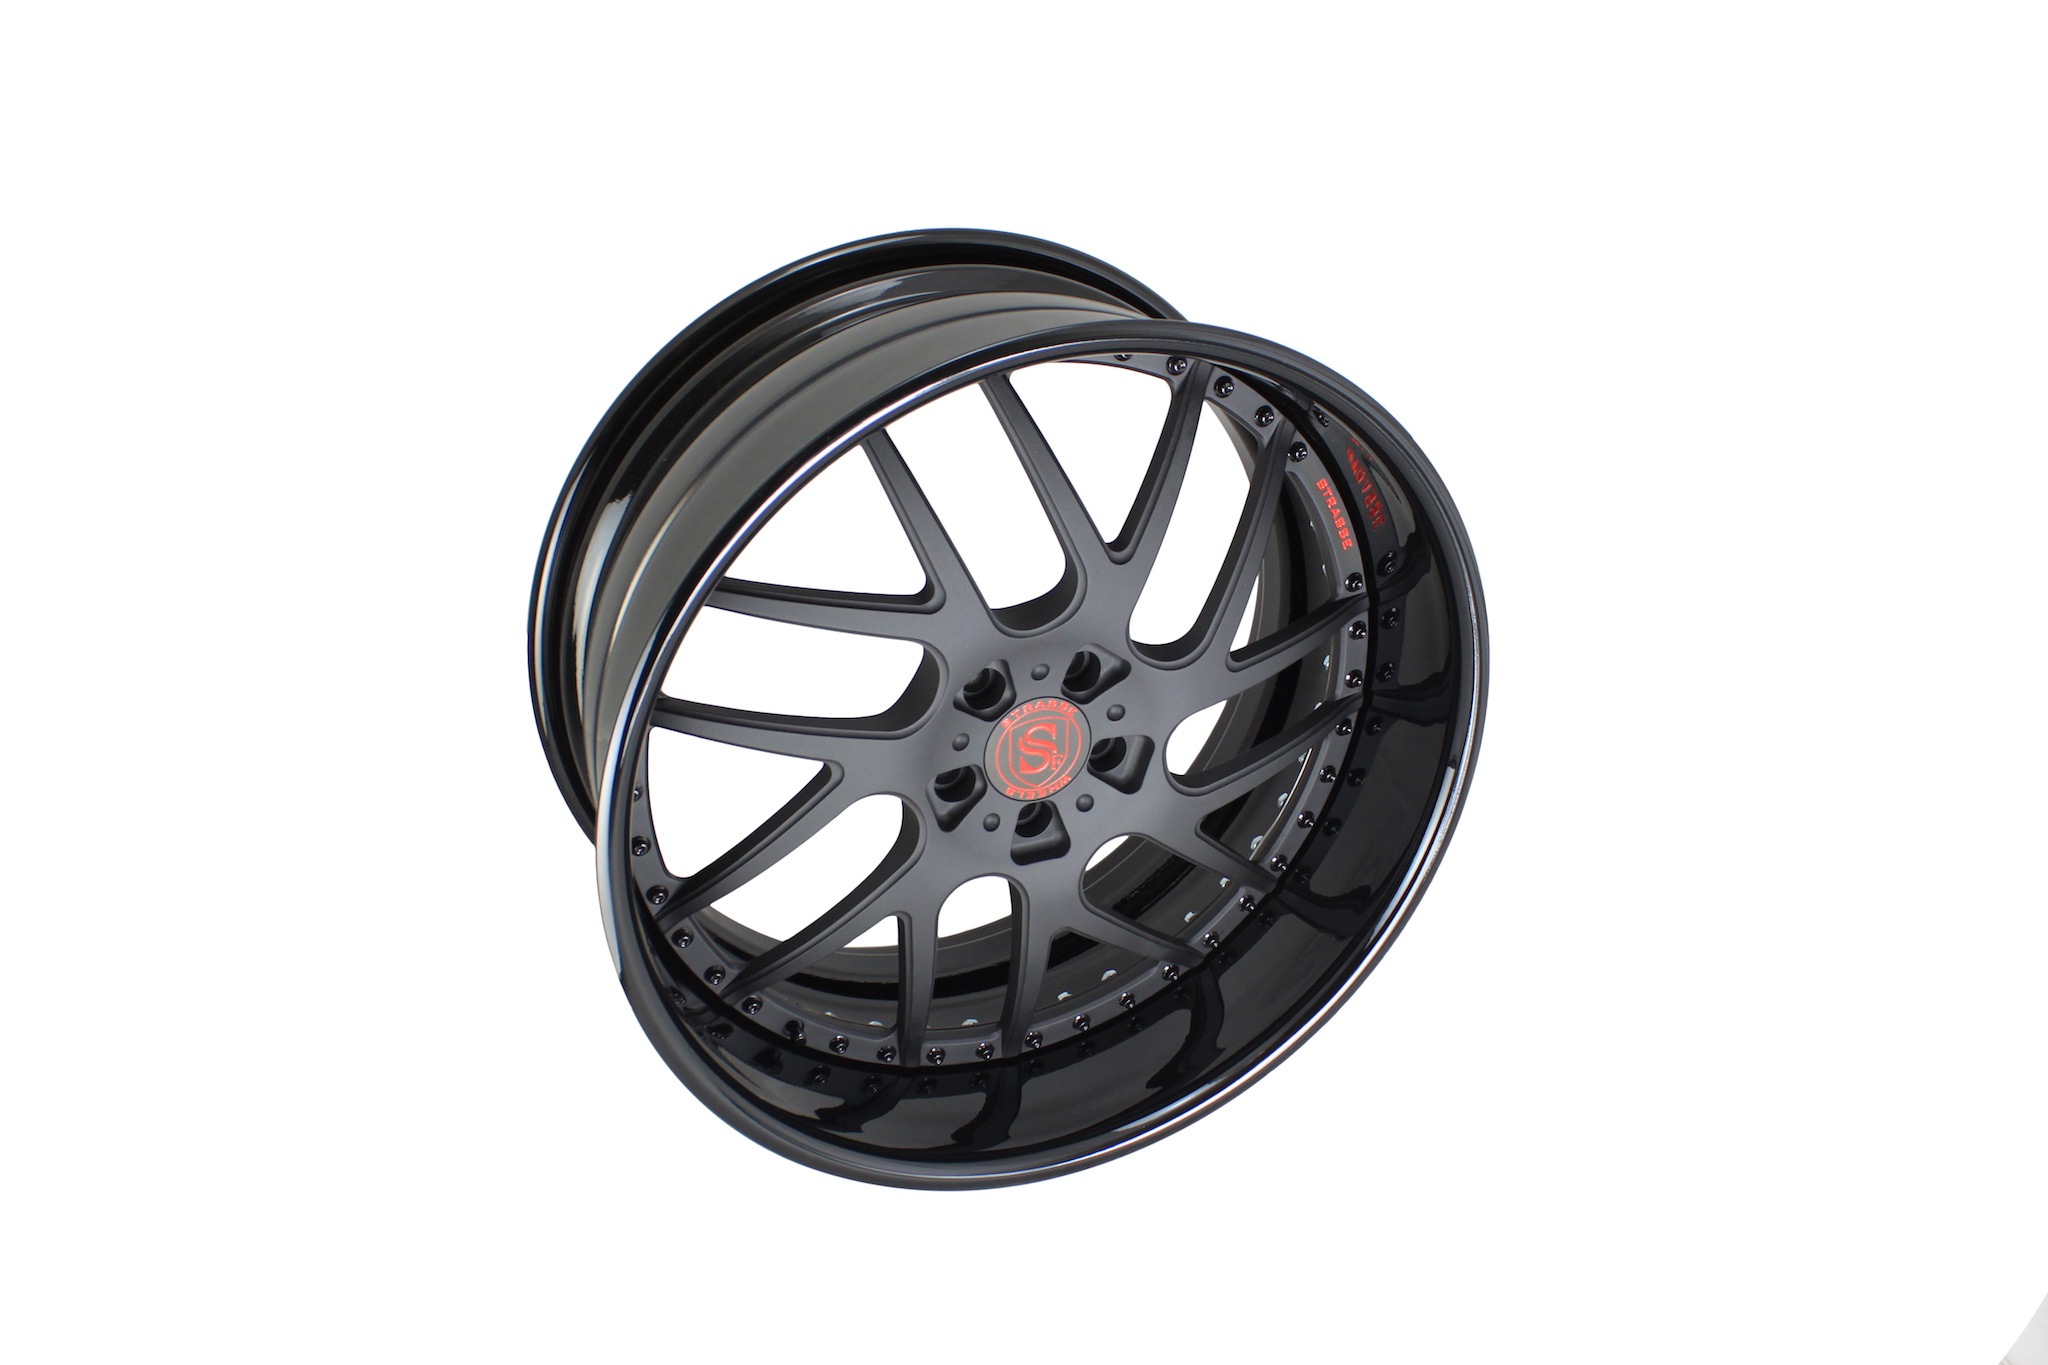 Strasse SM7T SIGNATURE 3 Piece Forged Wheels